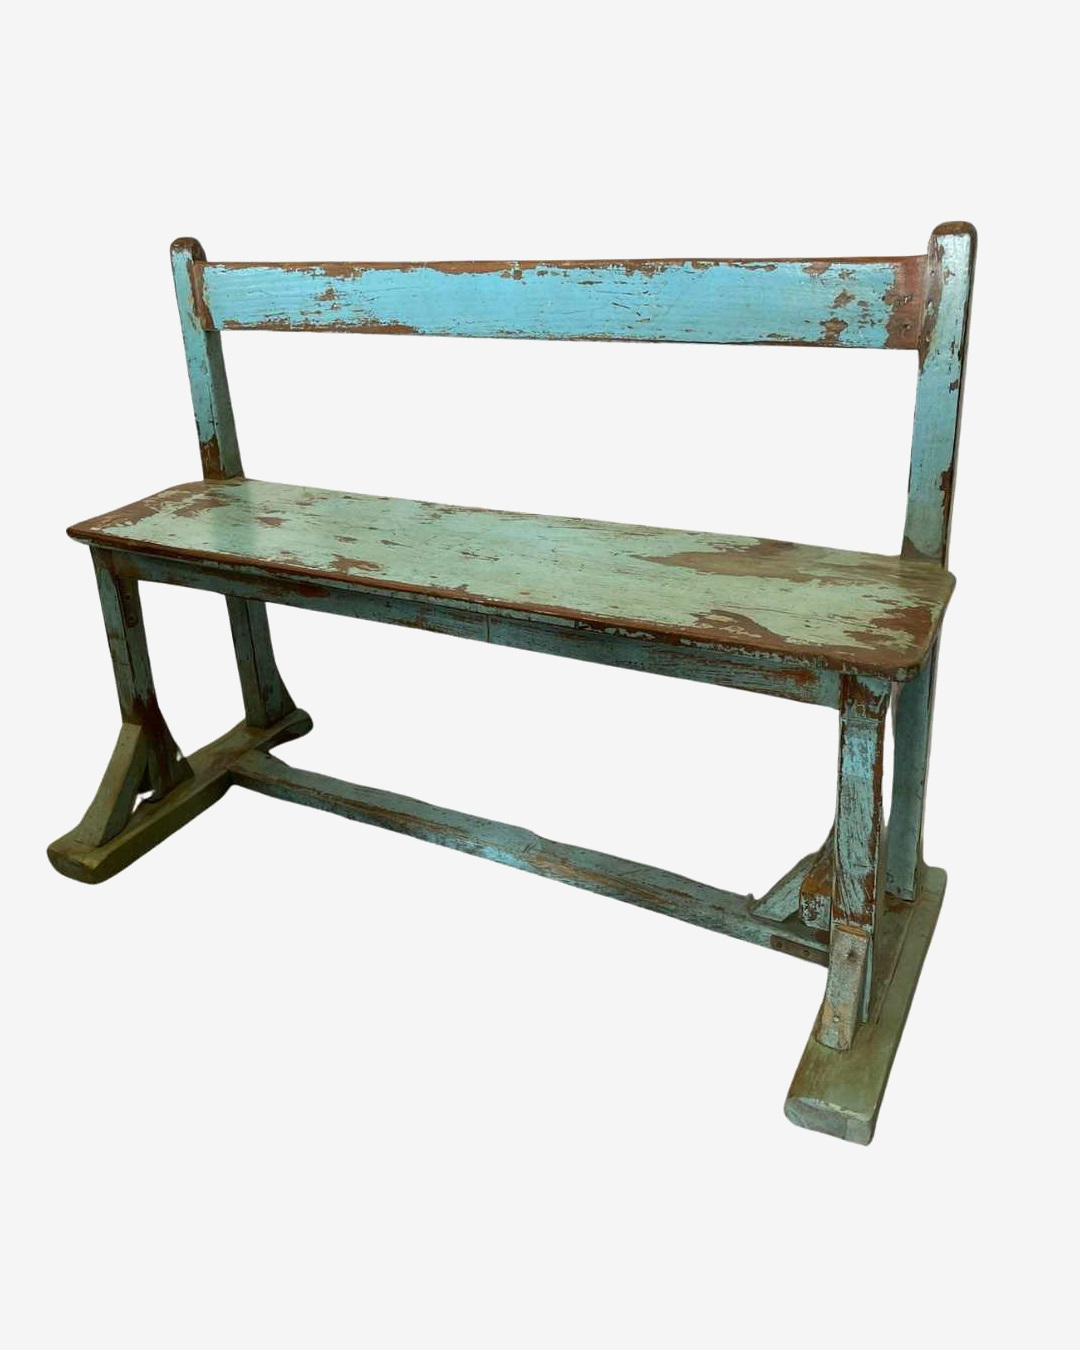 Blue and brown rustic wooden bench seat